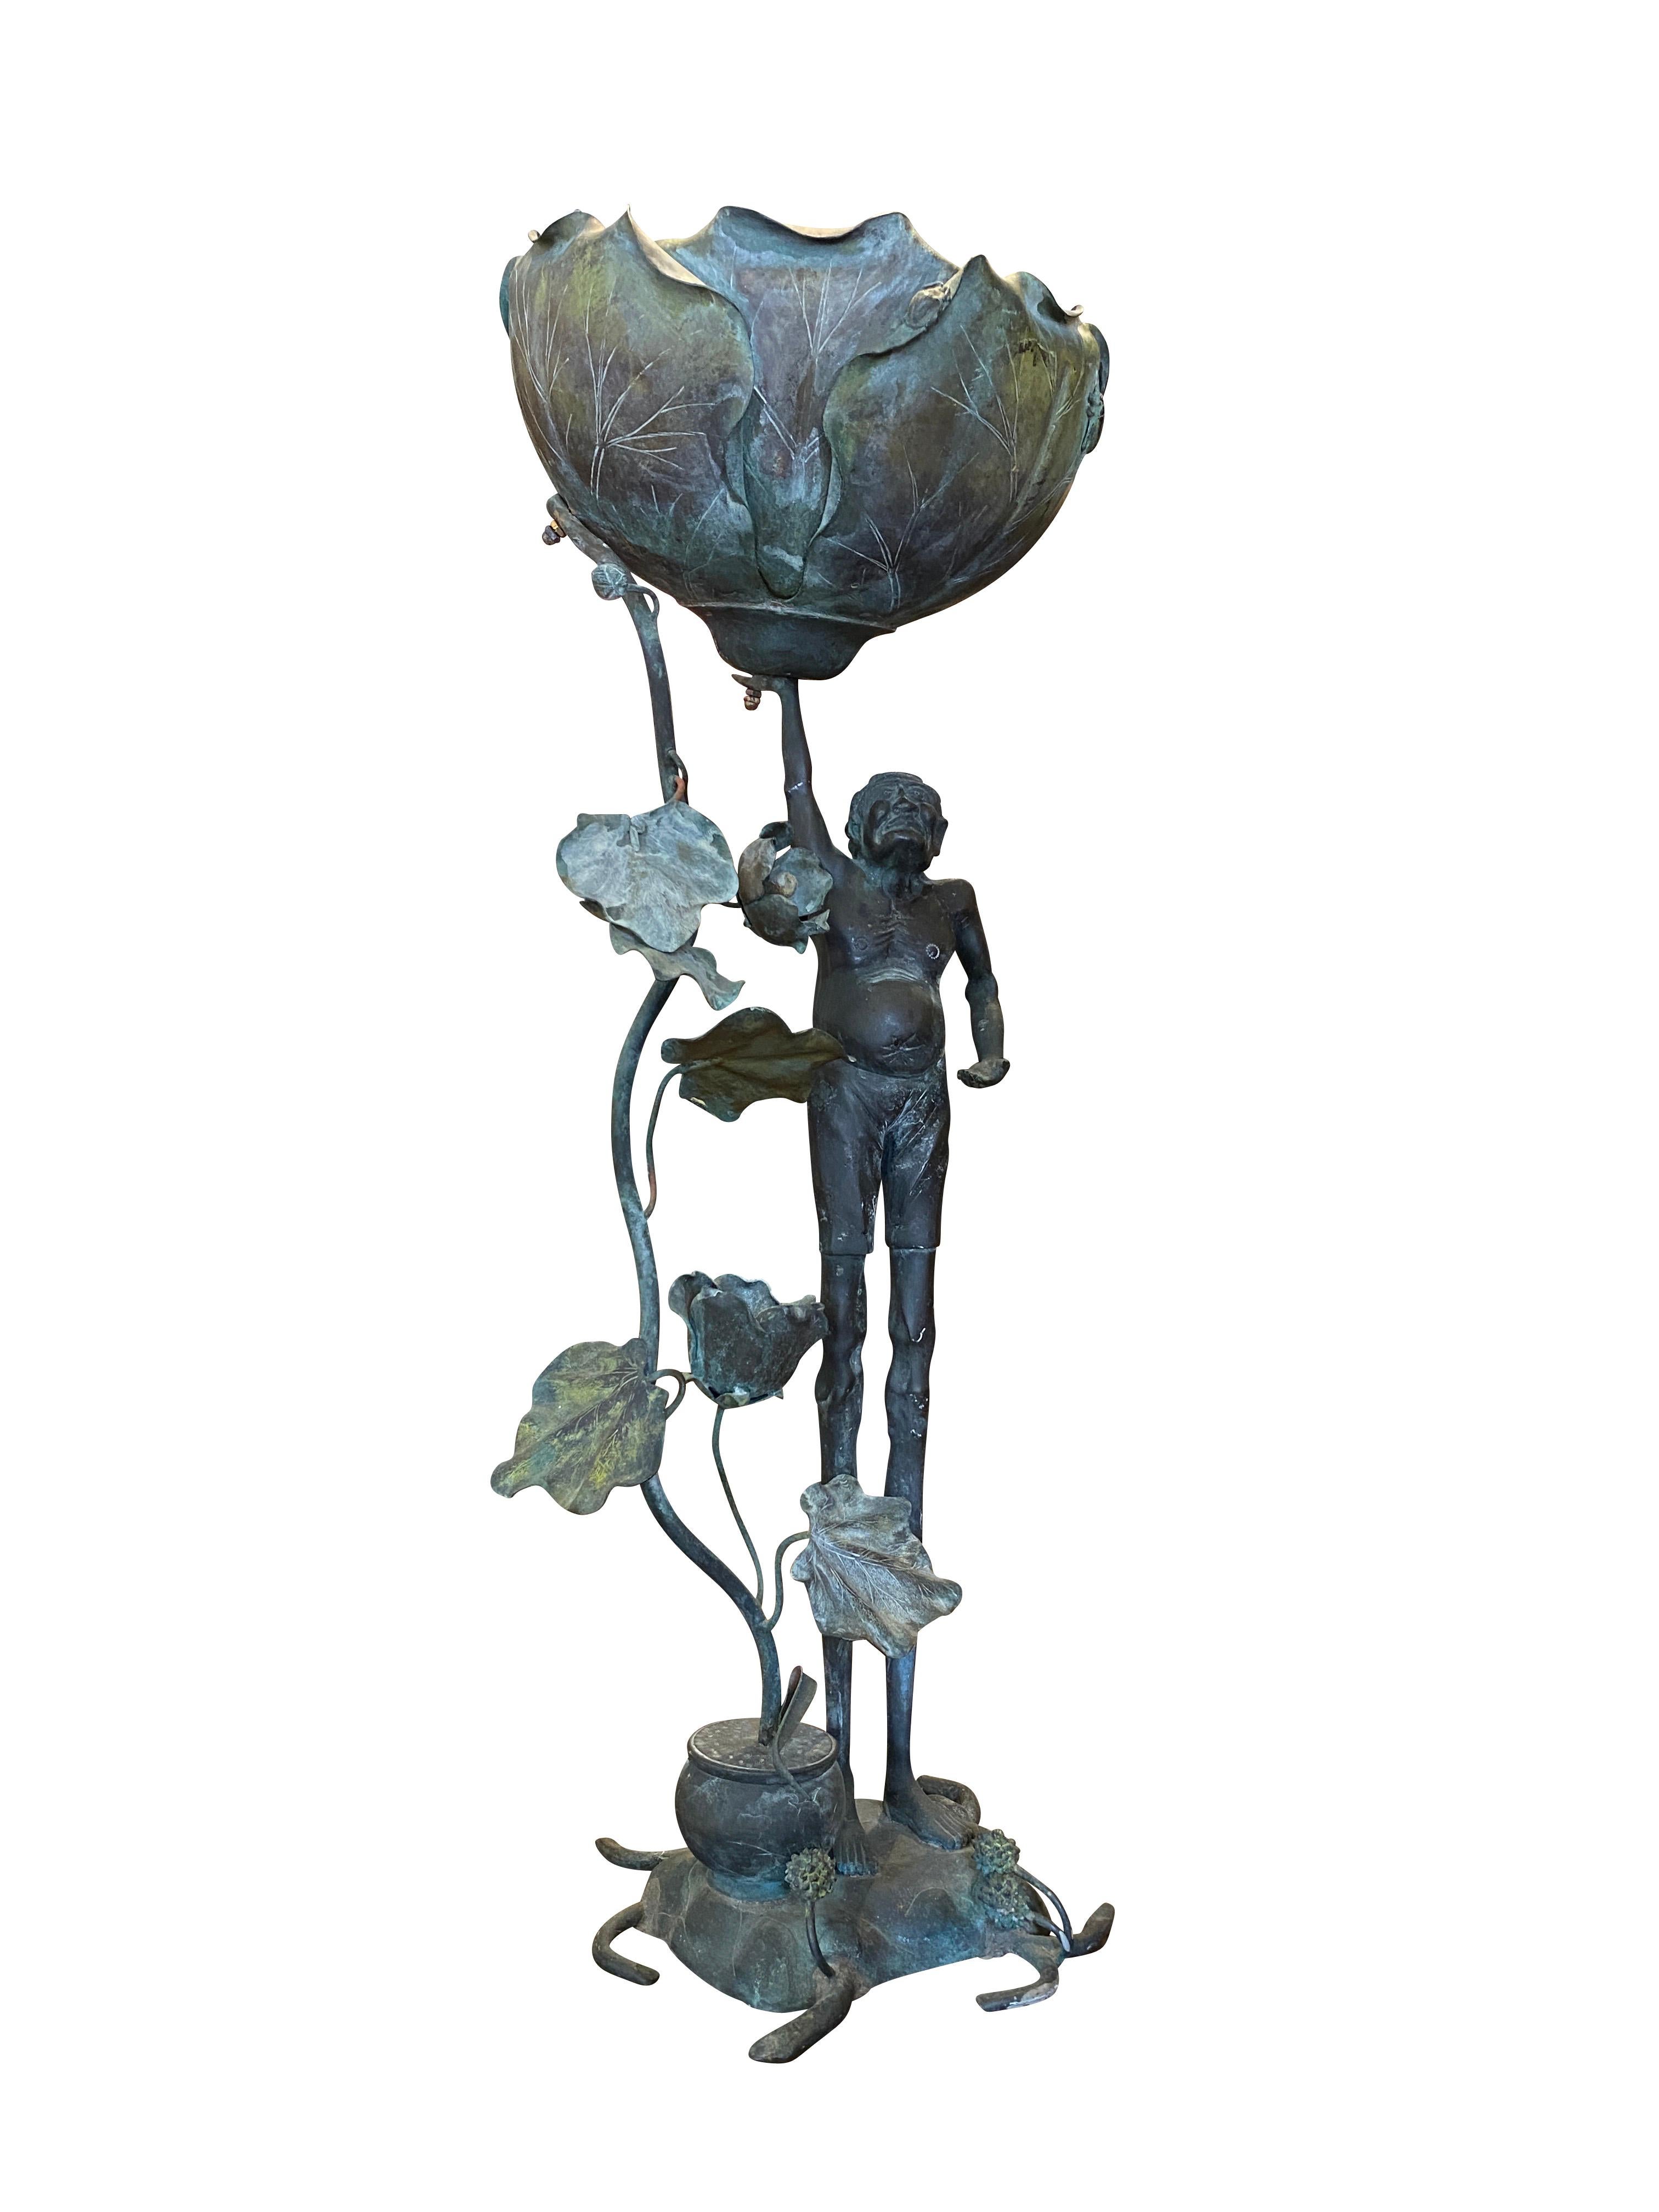 Ashinaga stands holding a fully open Lotus blossom with trailing vine and base with small urn the vine sprouts from.